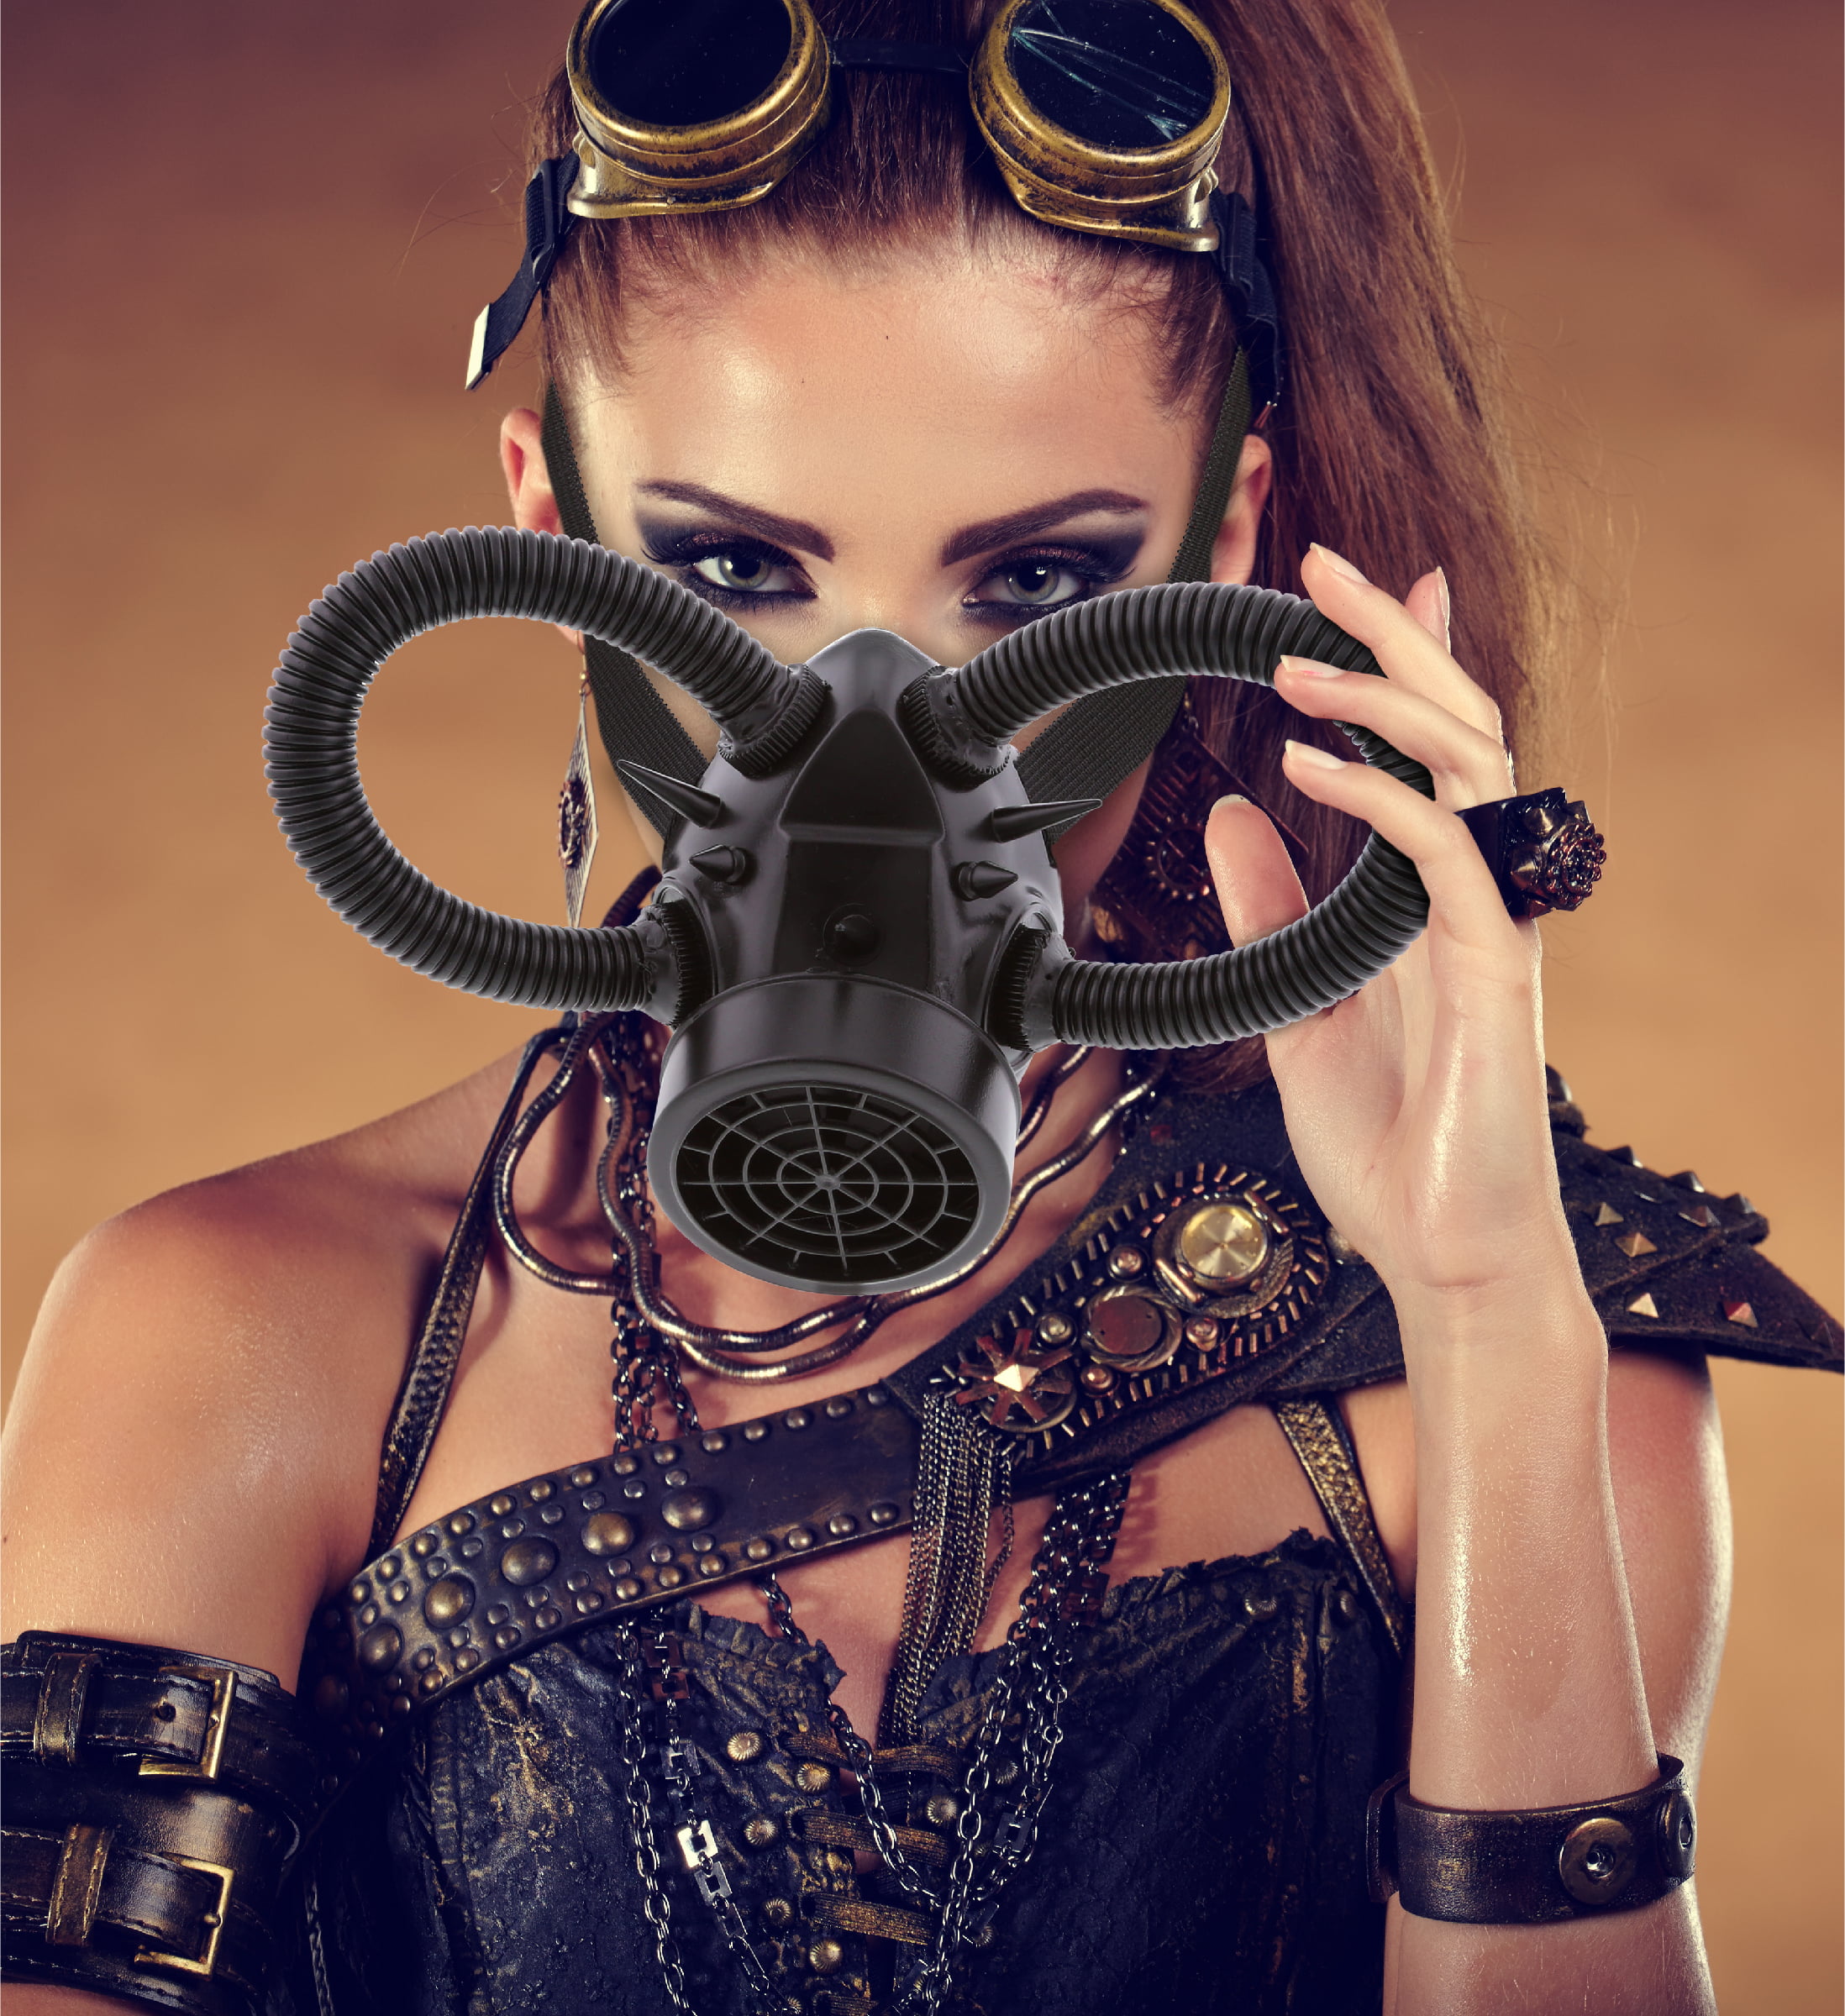 Attitude Studio Black Gas Mask - Steampunk Mask with Respirator for Men and Women, Mask Cosplay Accessory, Perfect Cosplay Mask for Conventions, Halloween Parties, and Special Themed Events - Walmart.com